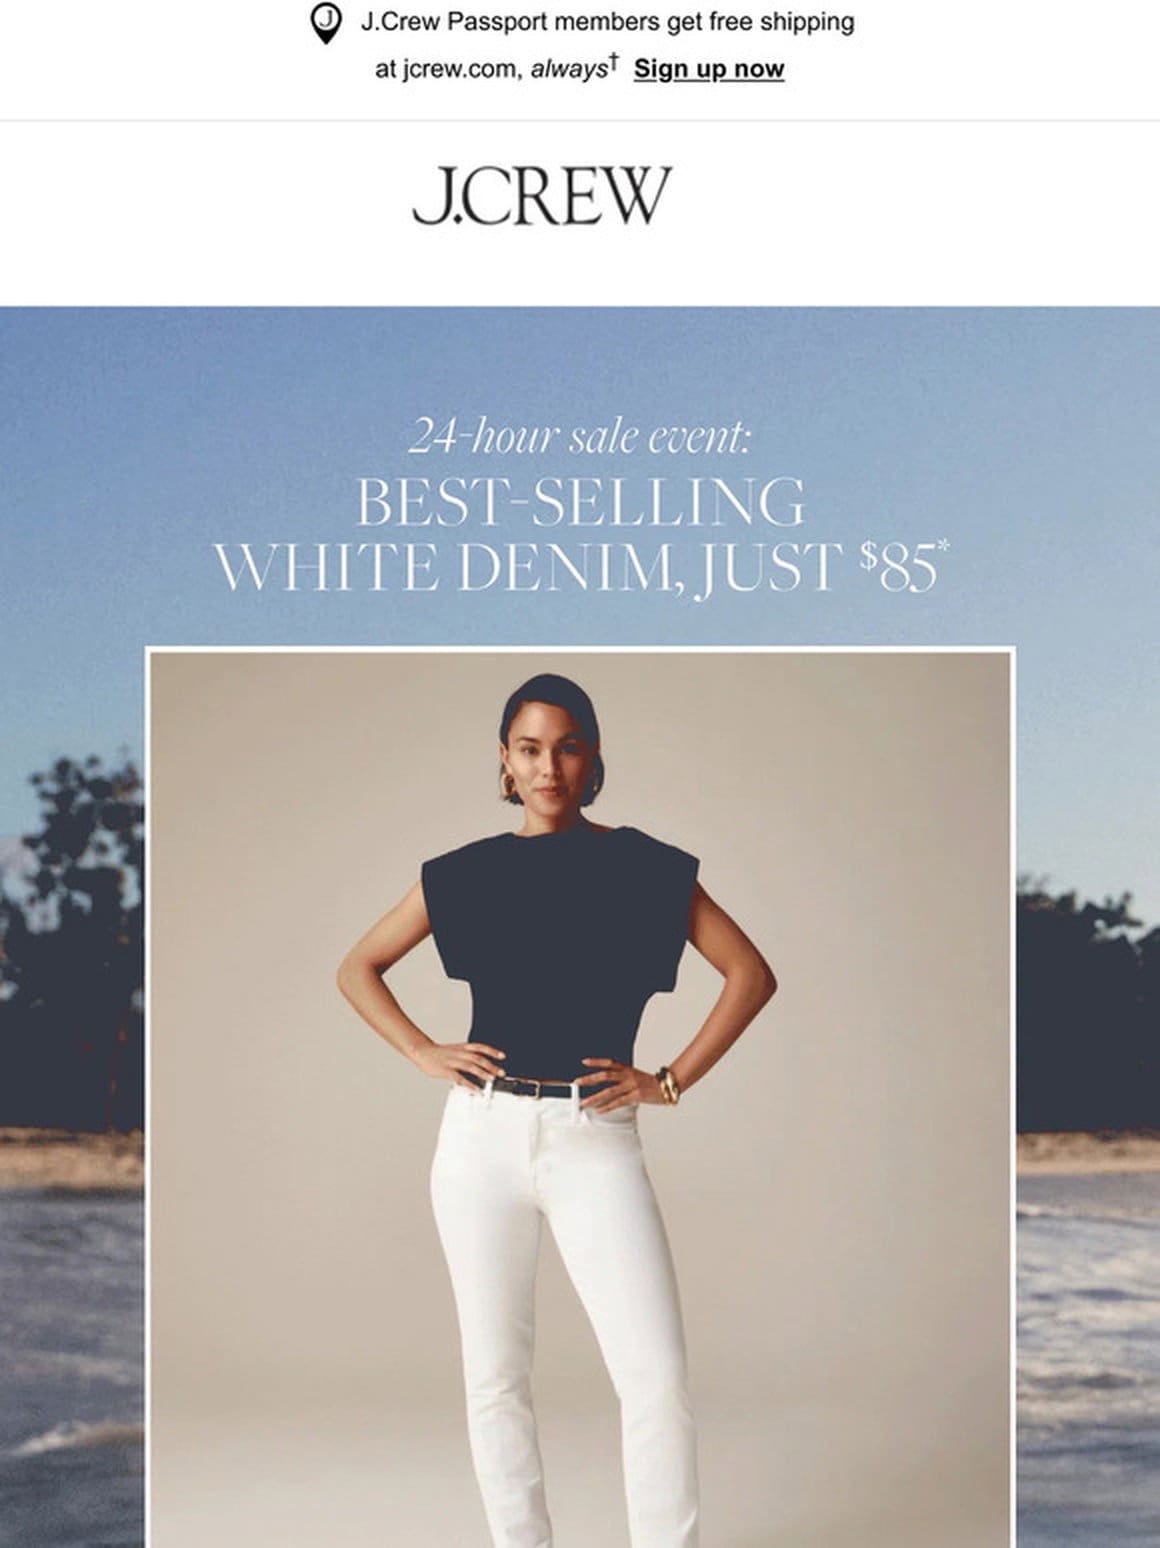 White denim， just $85， today only! We never do this…